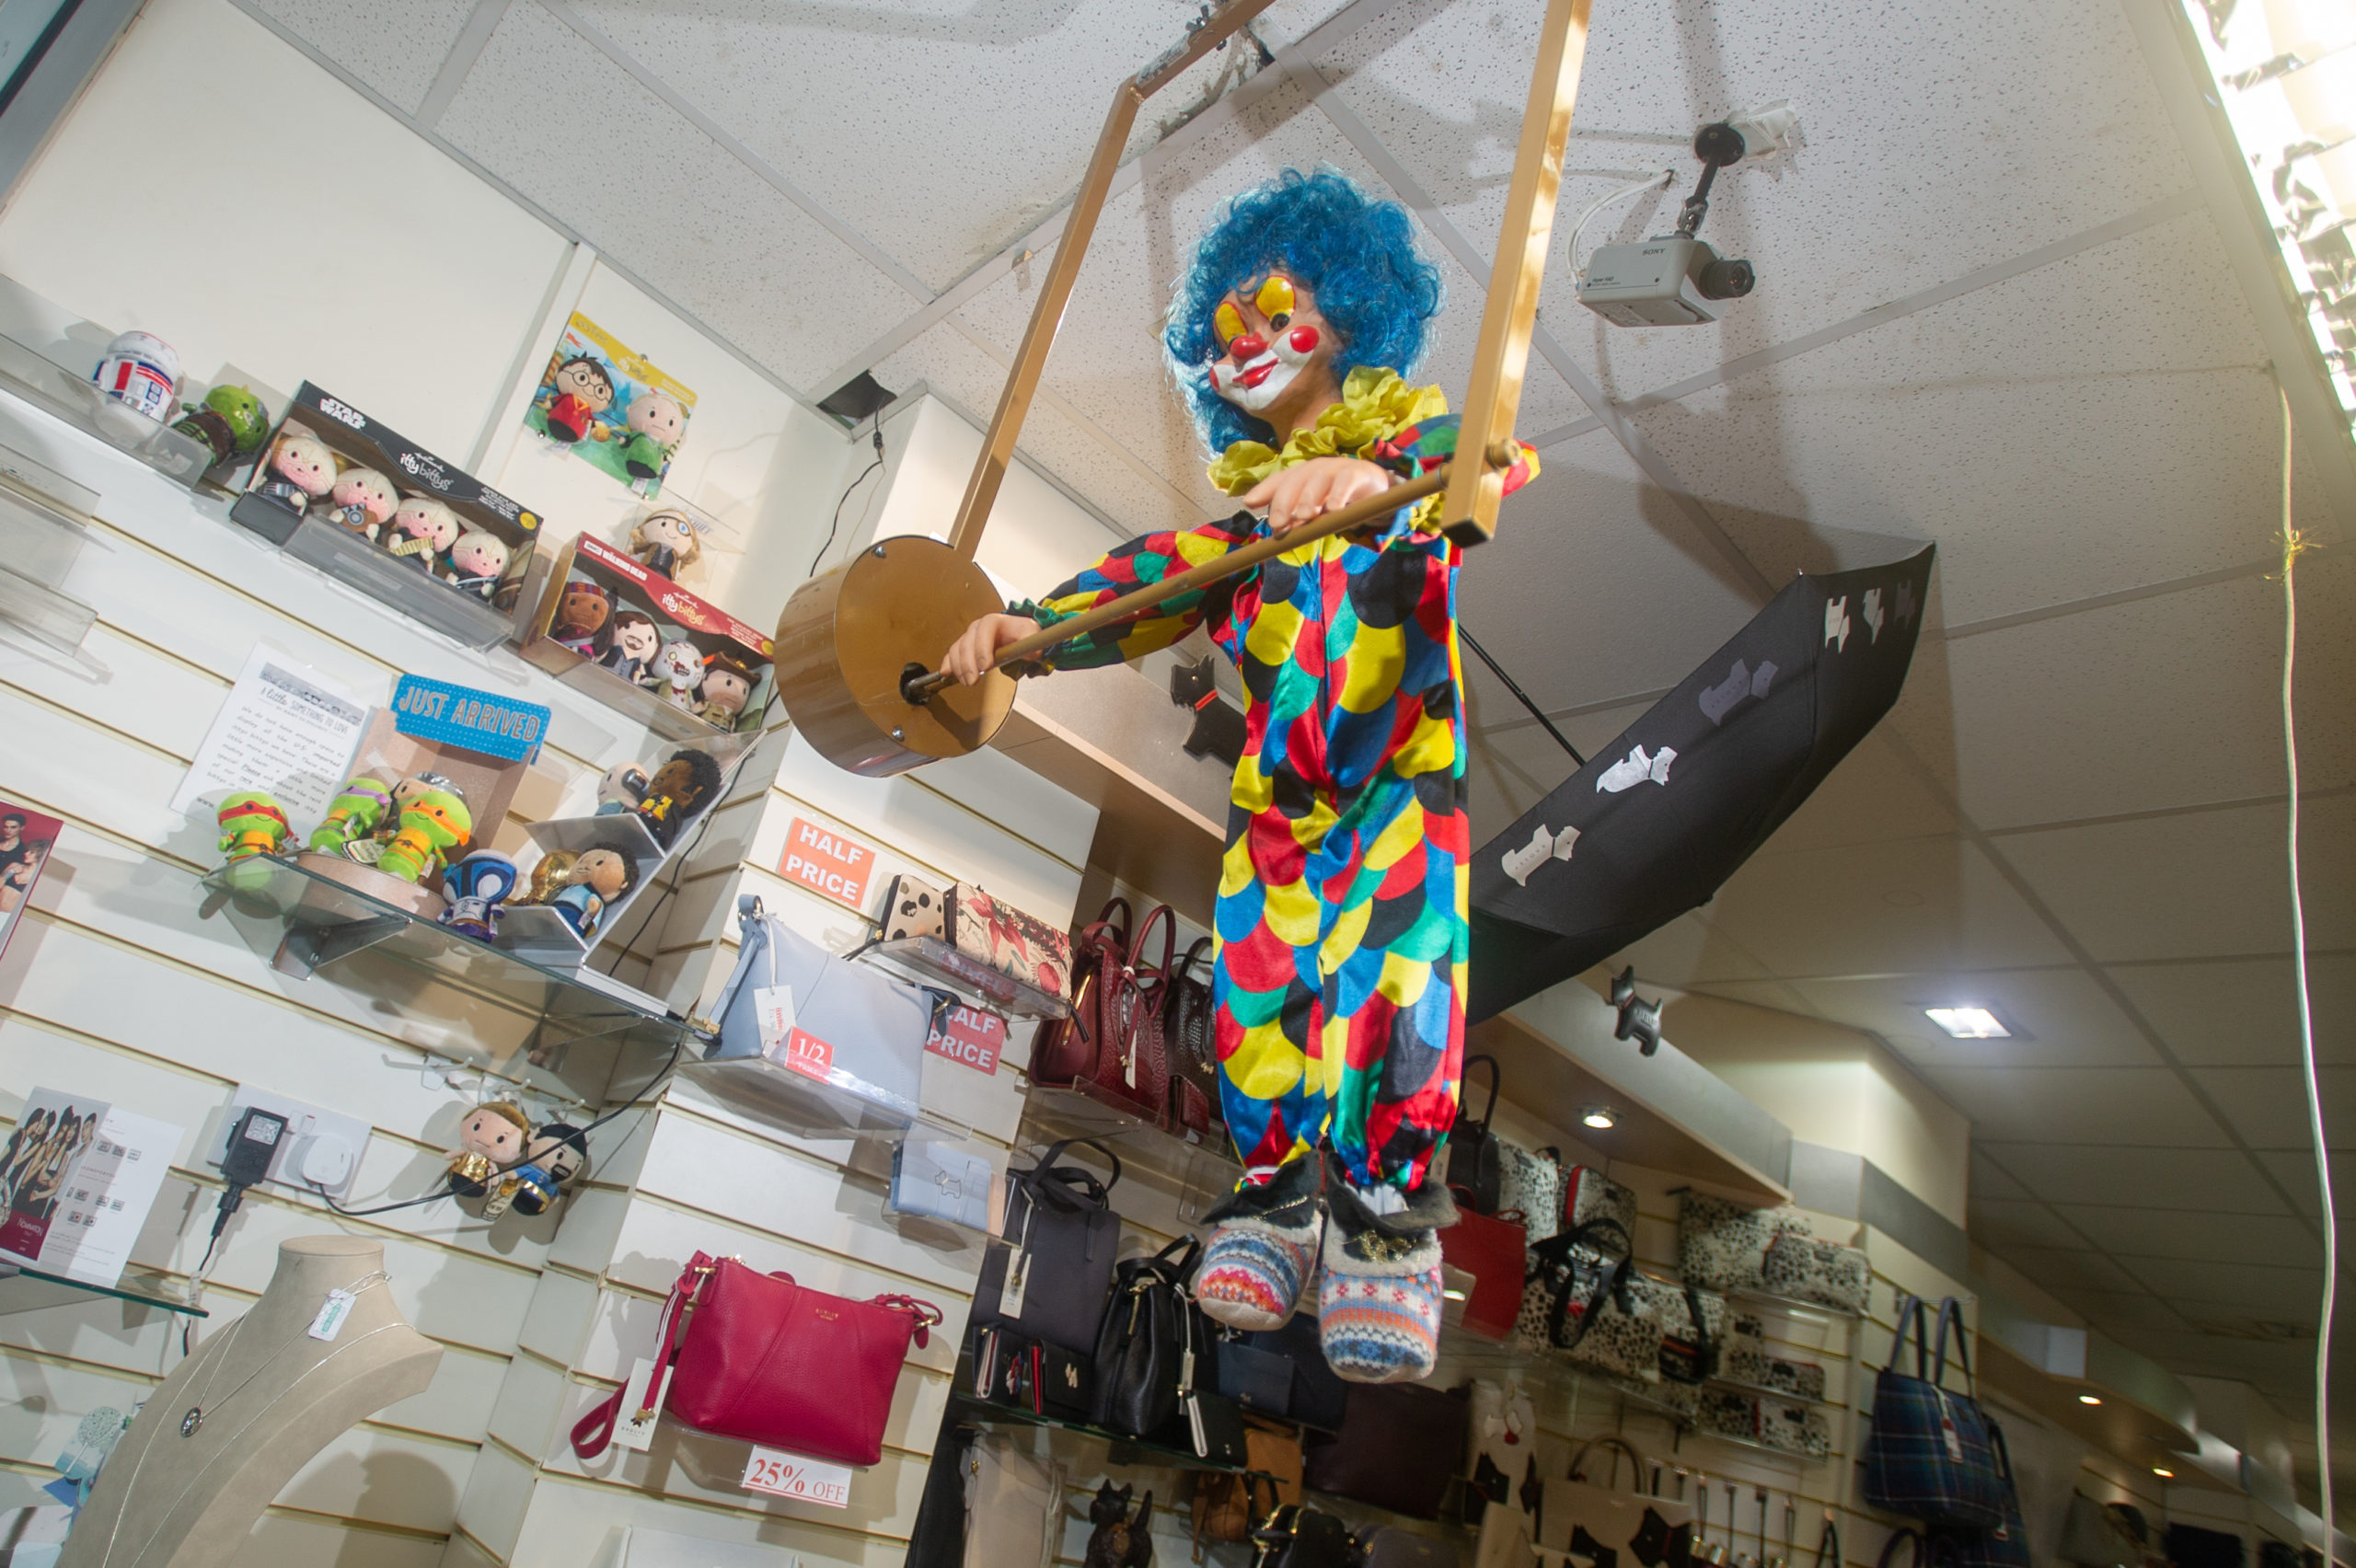 The clown back in place performing in the window of The Present Shop, Mercat Shopping Centre